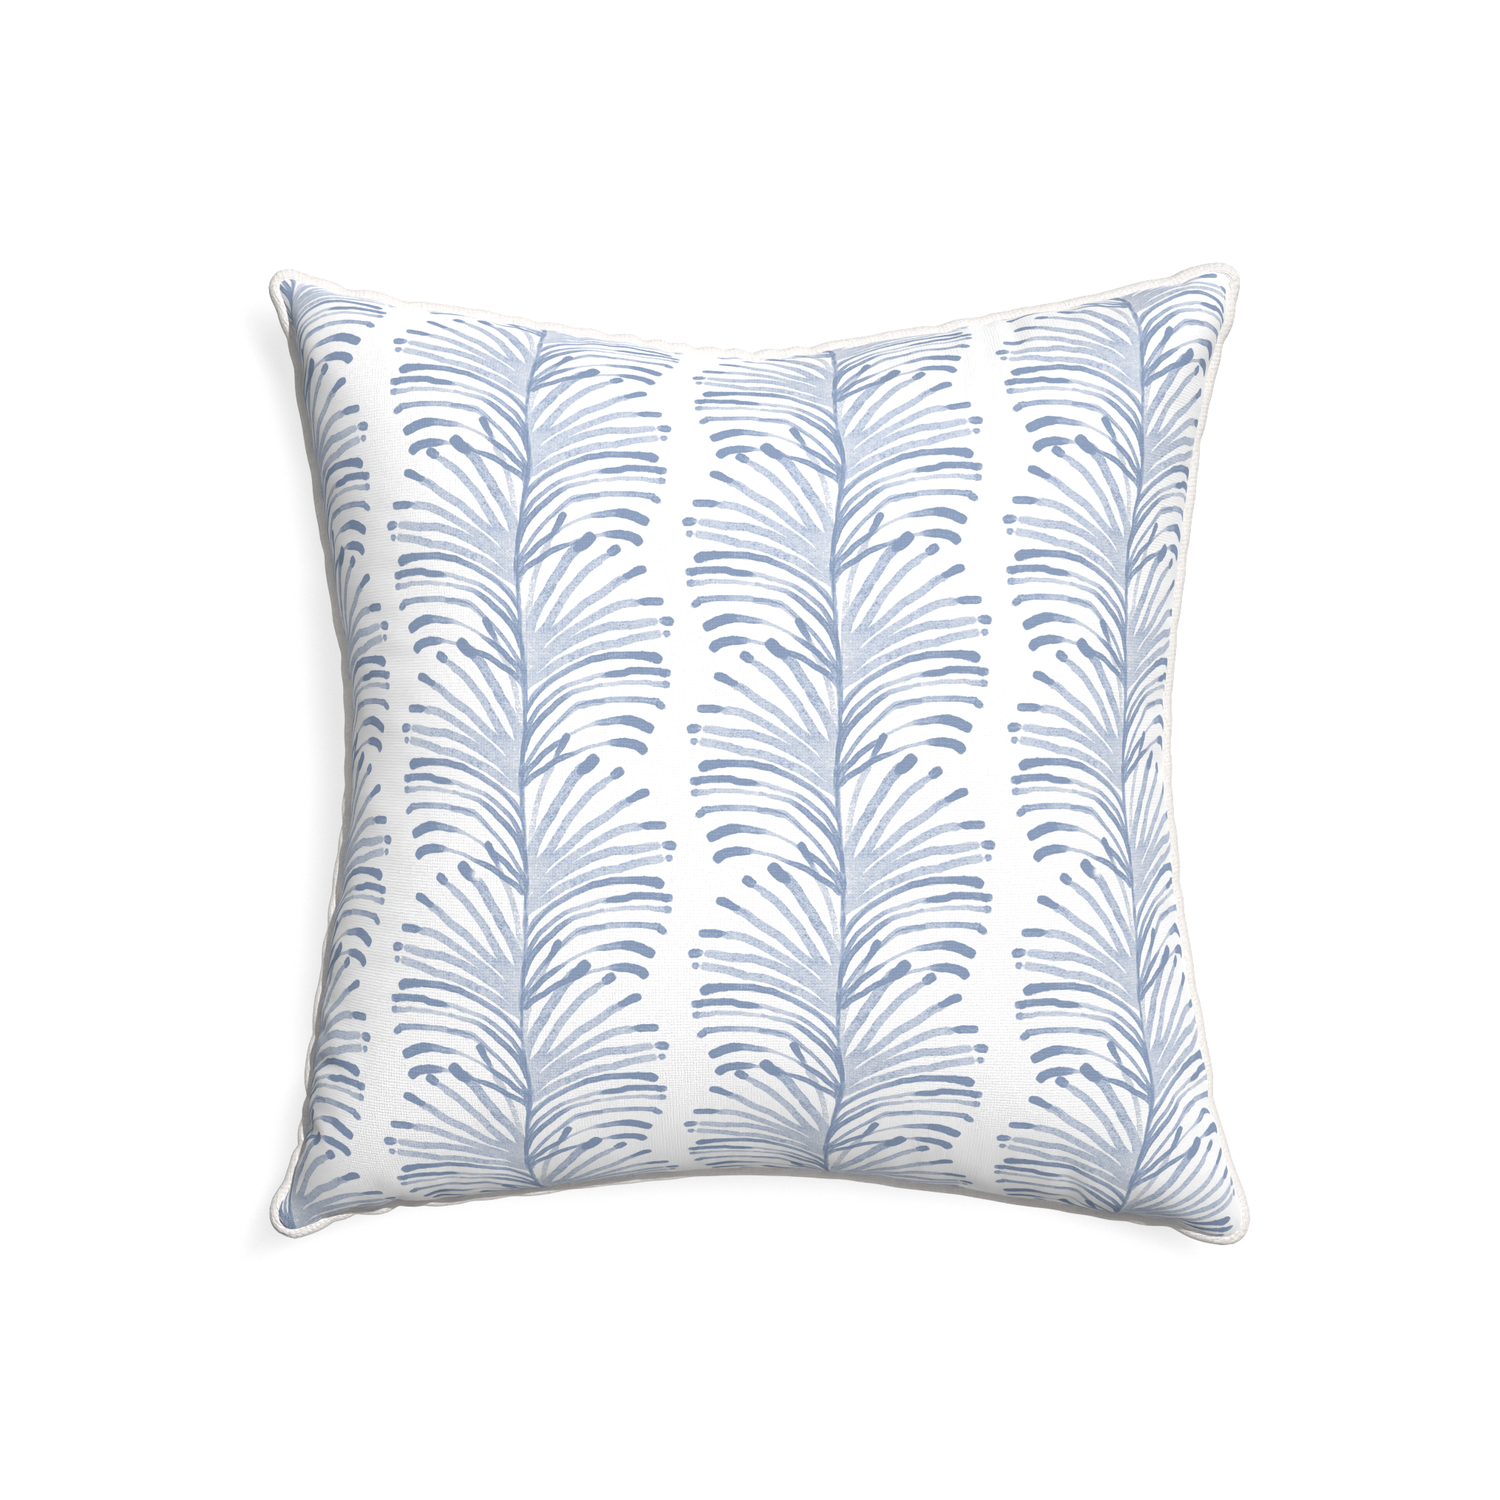 22-square emma sky custom pillow with snow piping on white background